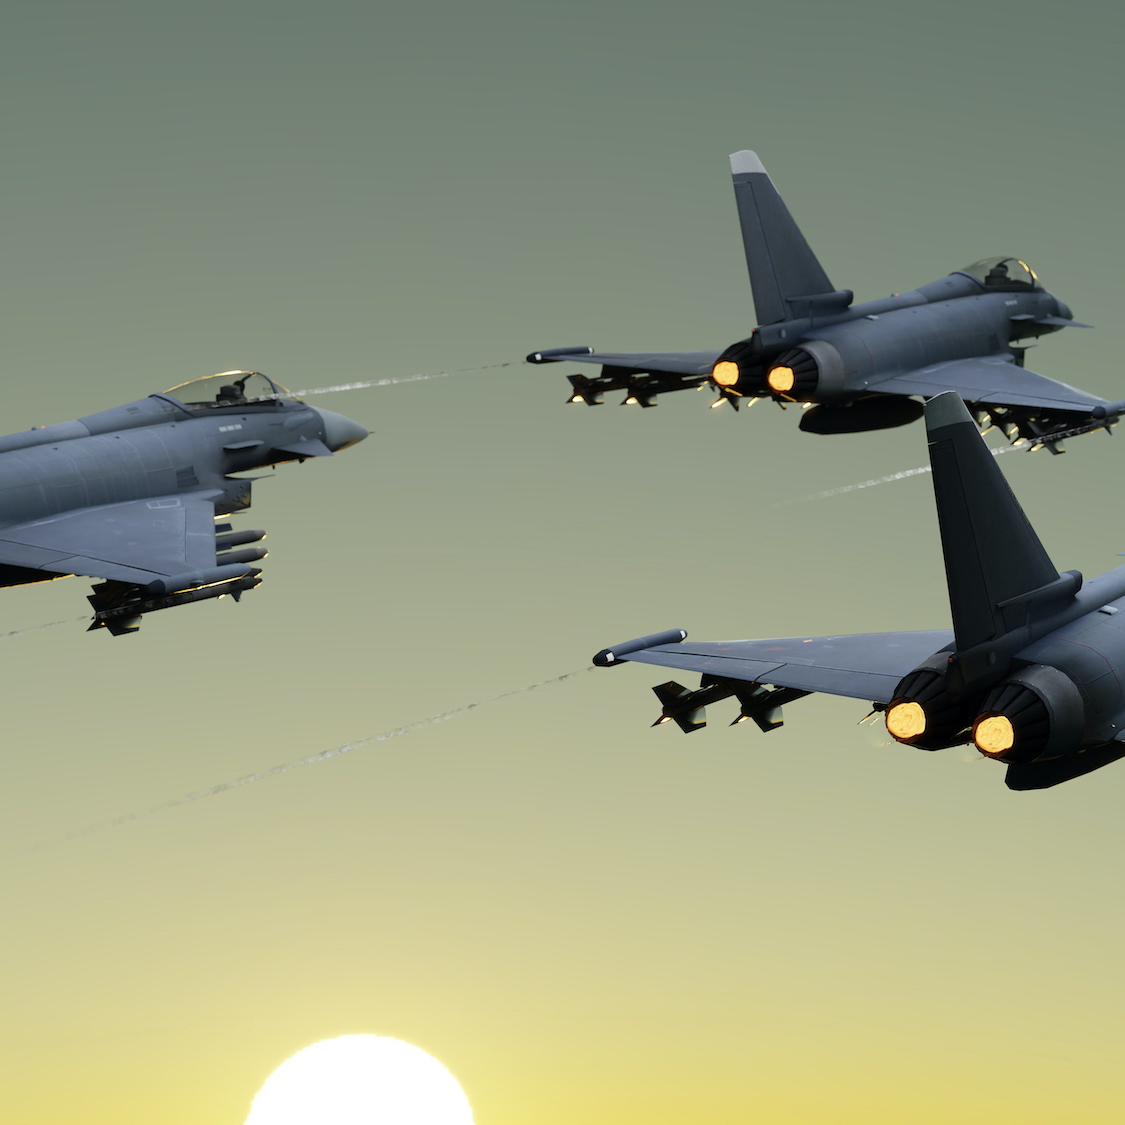 Trio of typhoons flying above the sun - square